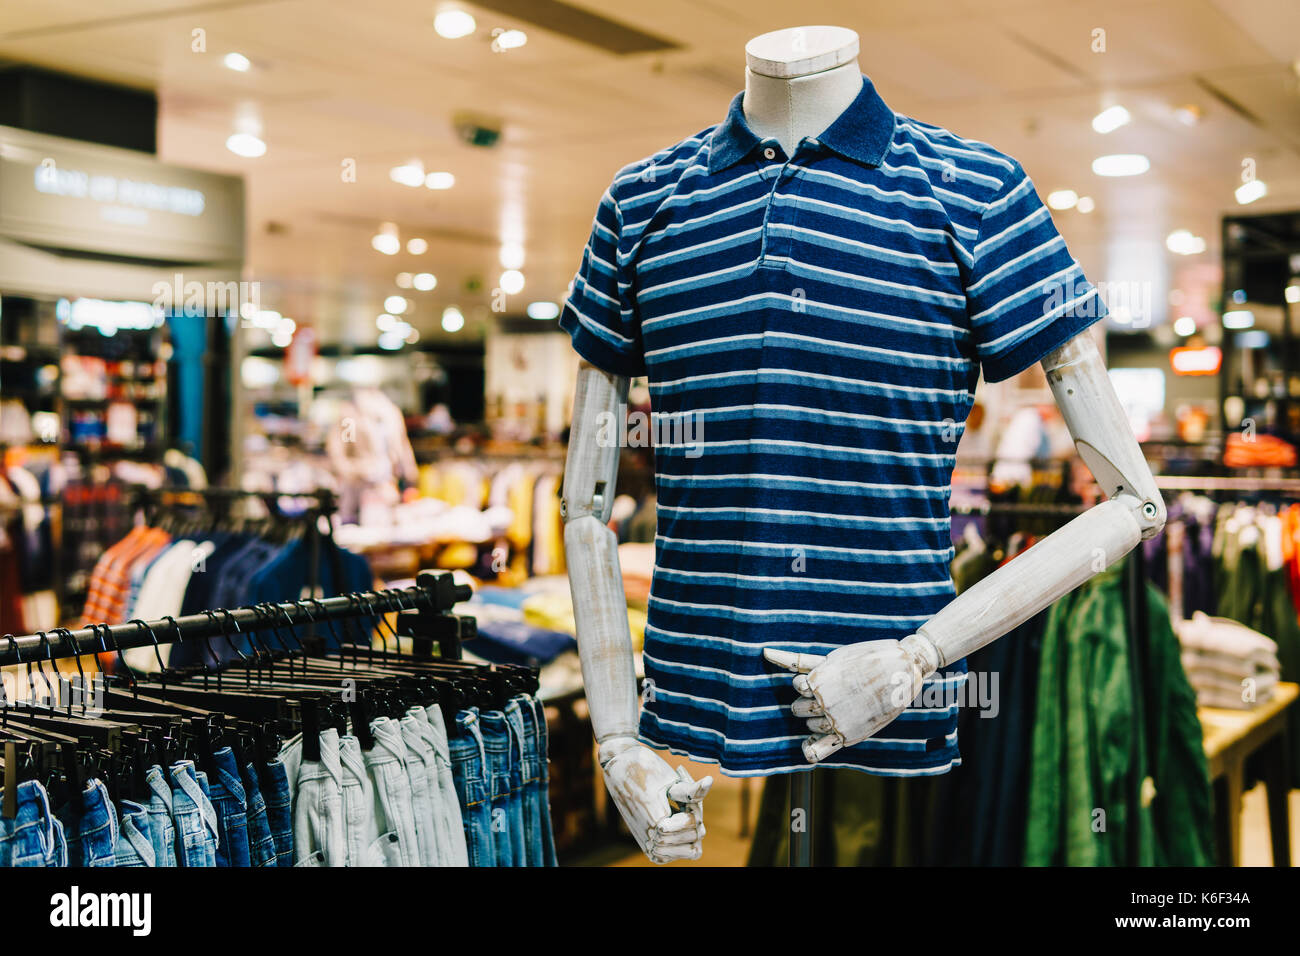 Vintage metal clothing mannequin display in interior girl's room closeup  Stock Photo - Alamy